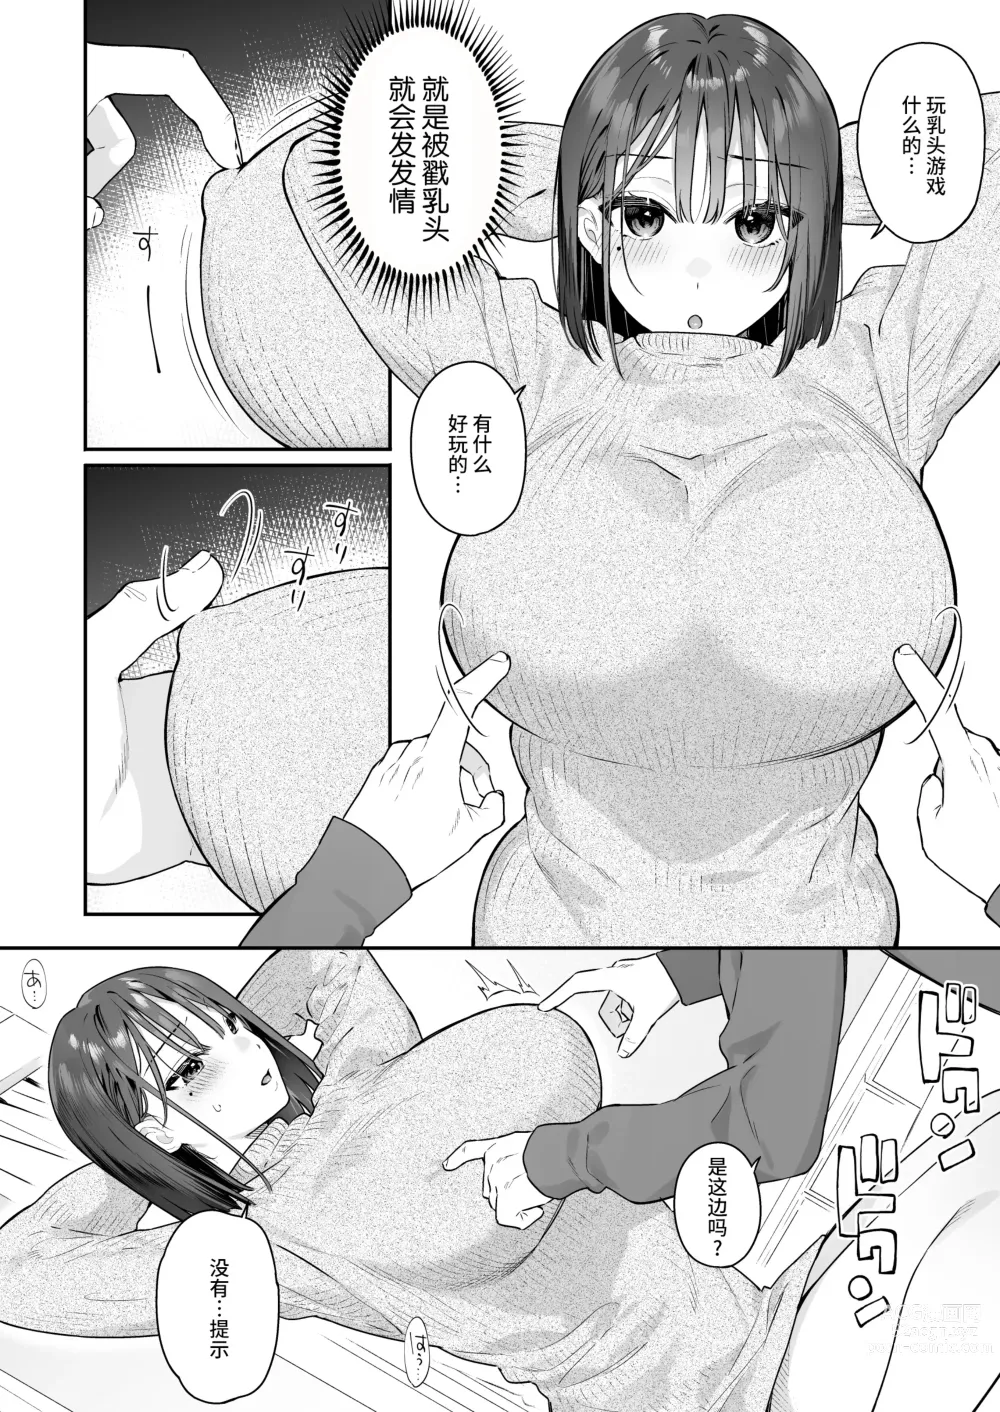 Page 4 of doujinshi 她的发情开关 2